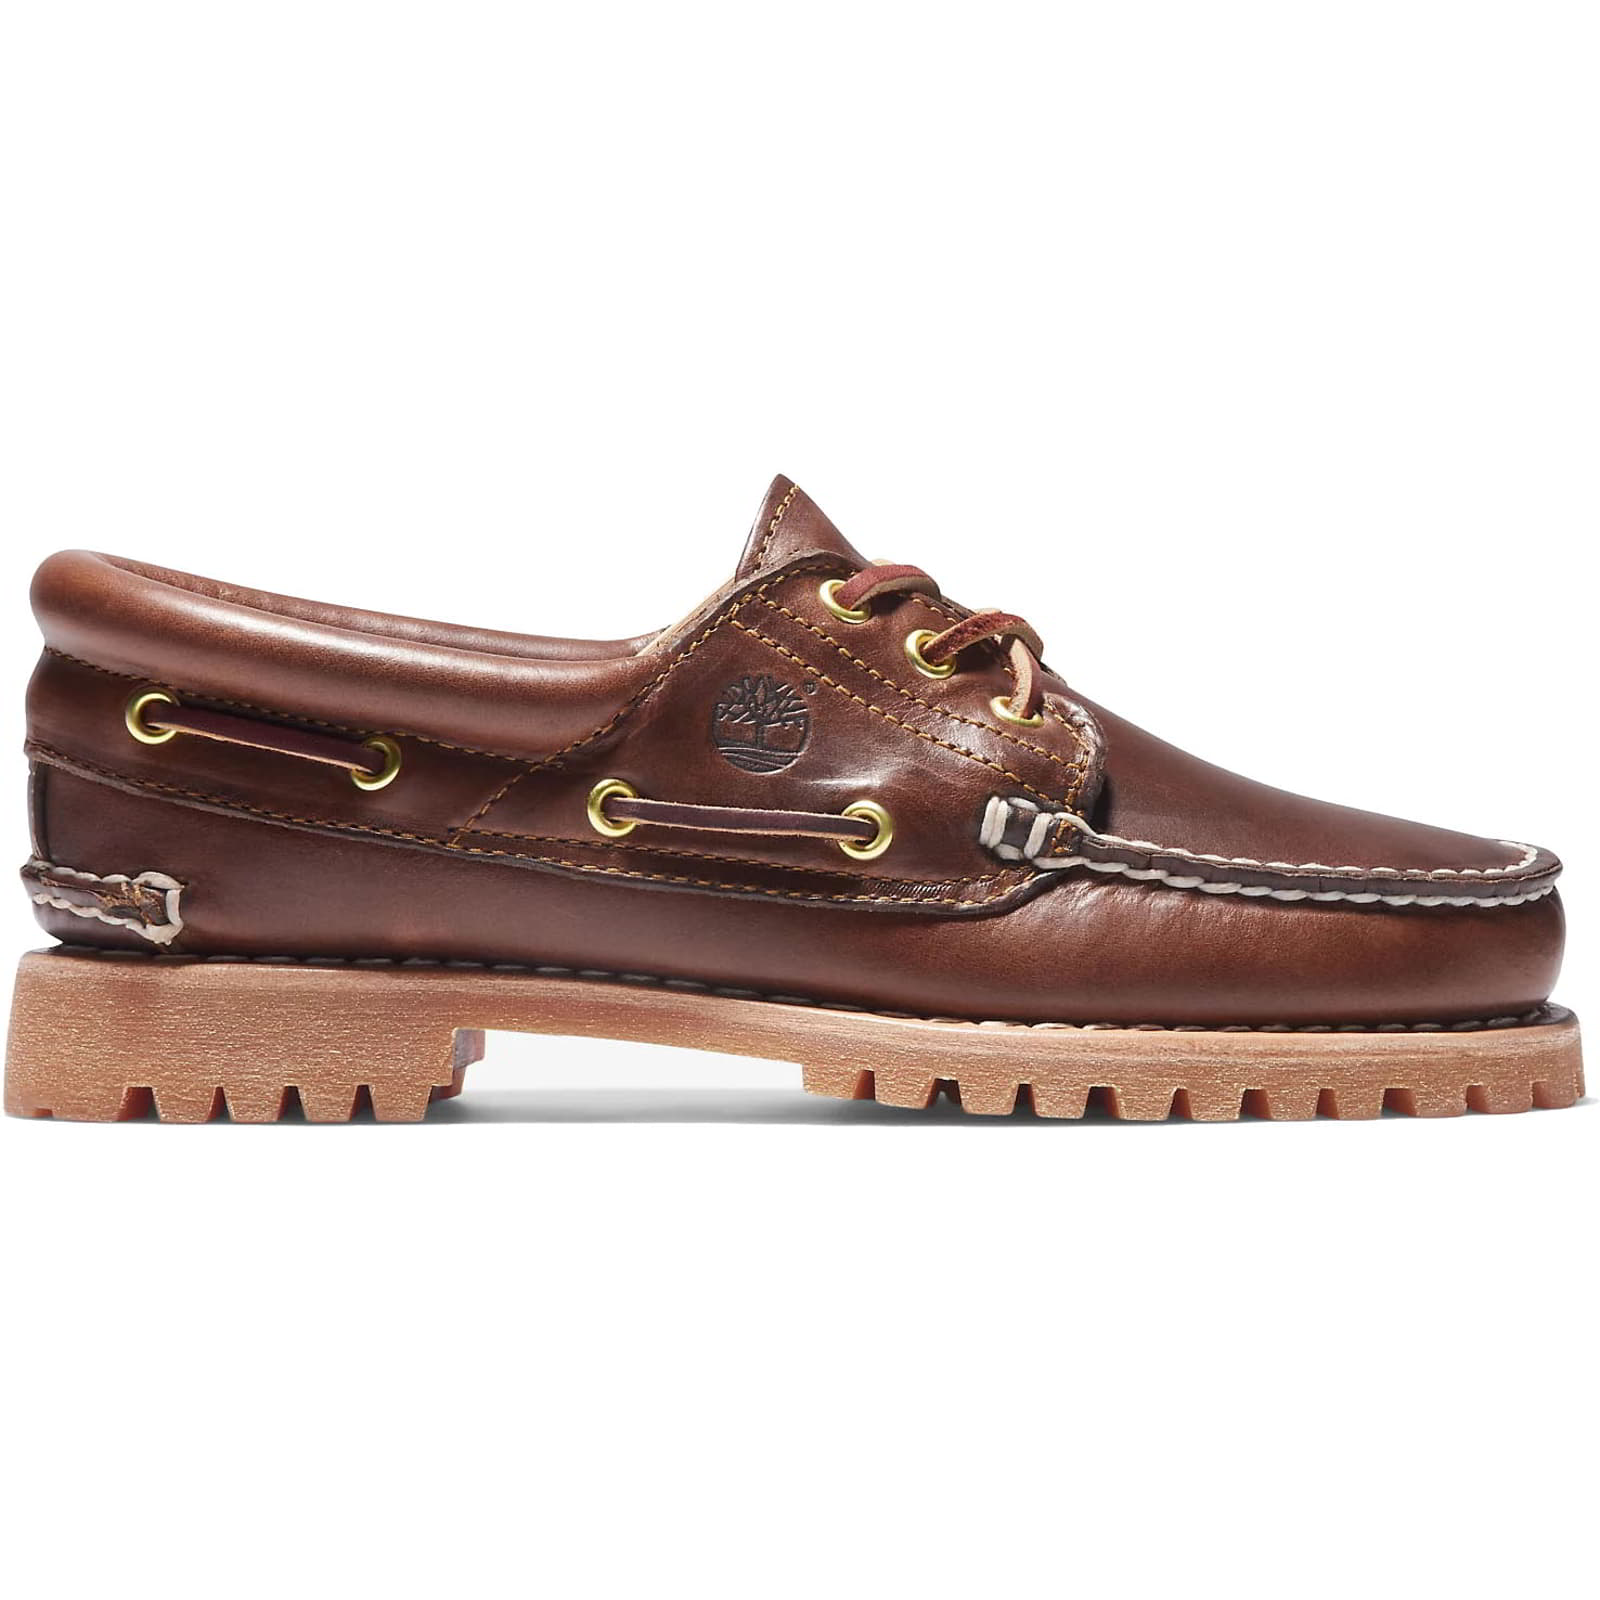 Timberland Womens Noreen Heritage Boat Shoe - Brown 51304 2951